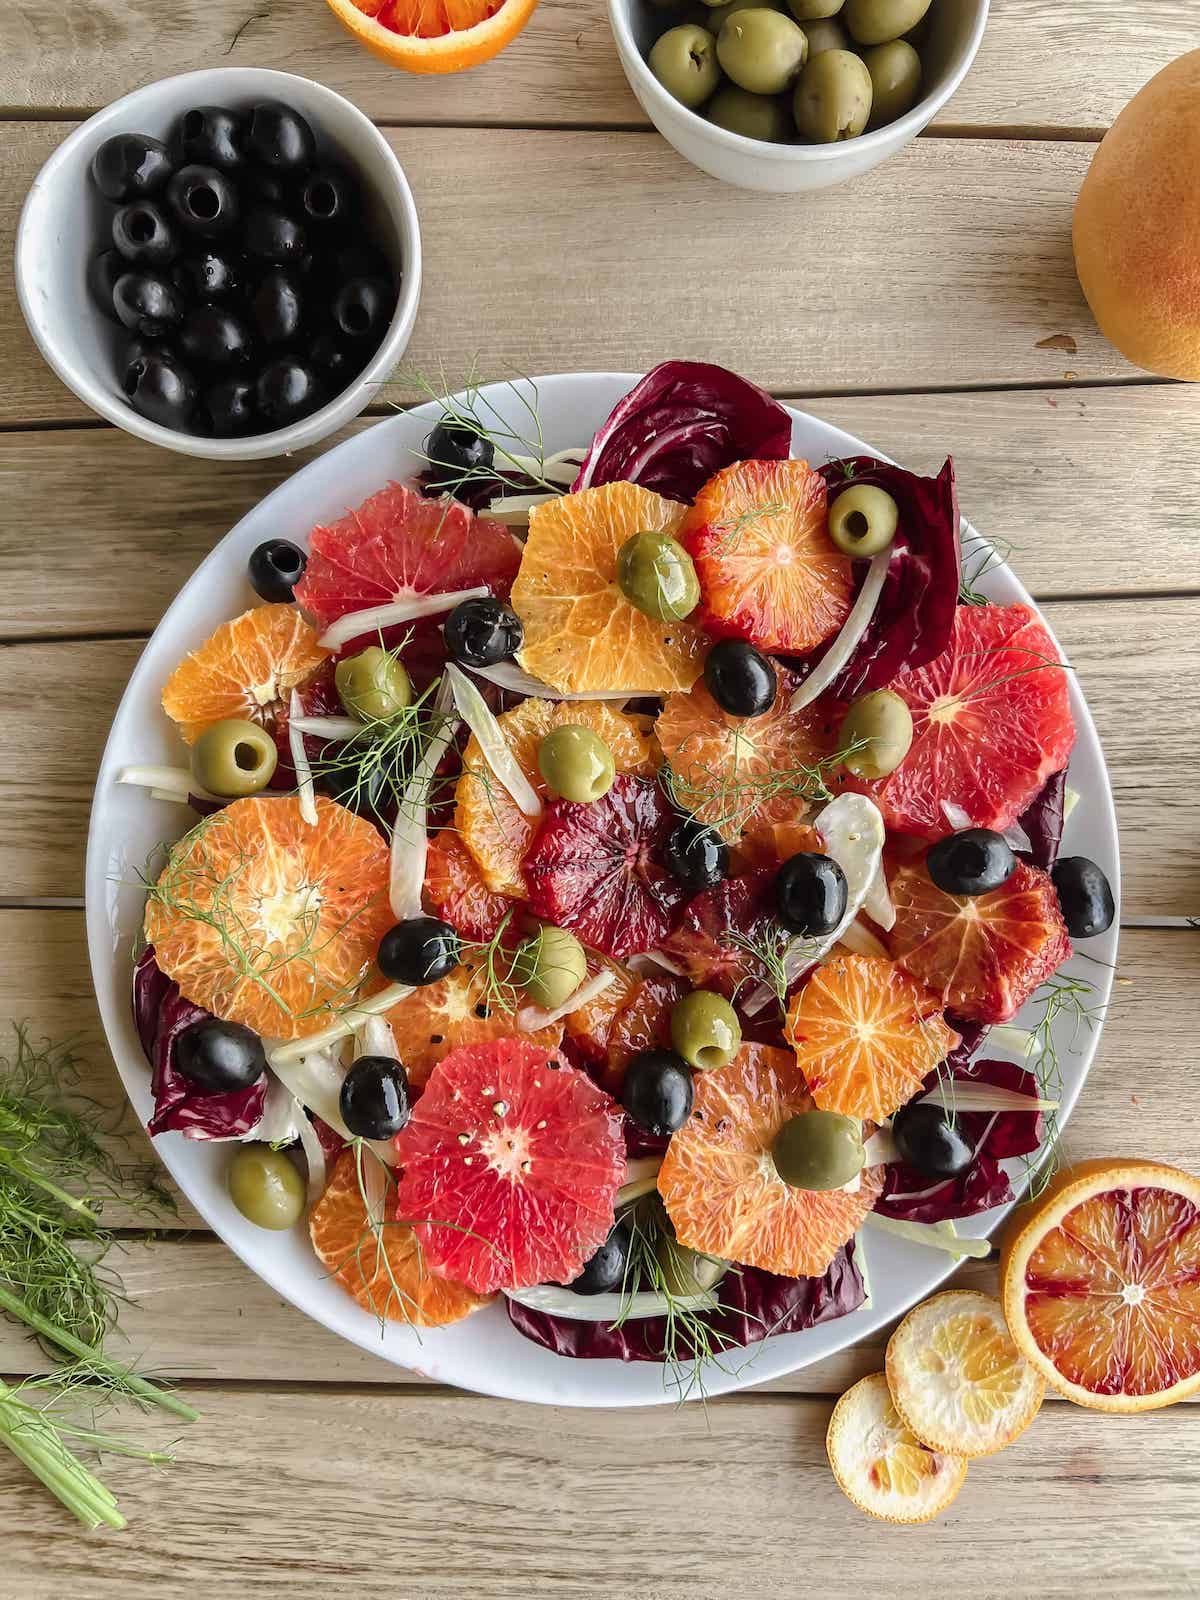 Round slices of mixed citrus fruit layered with thinly sliced fennel and topped with olives on a white plate on a wood table.